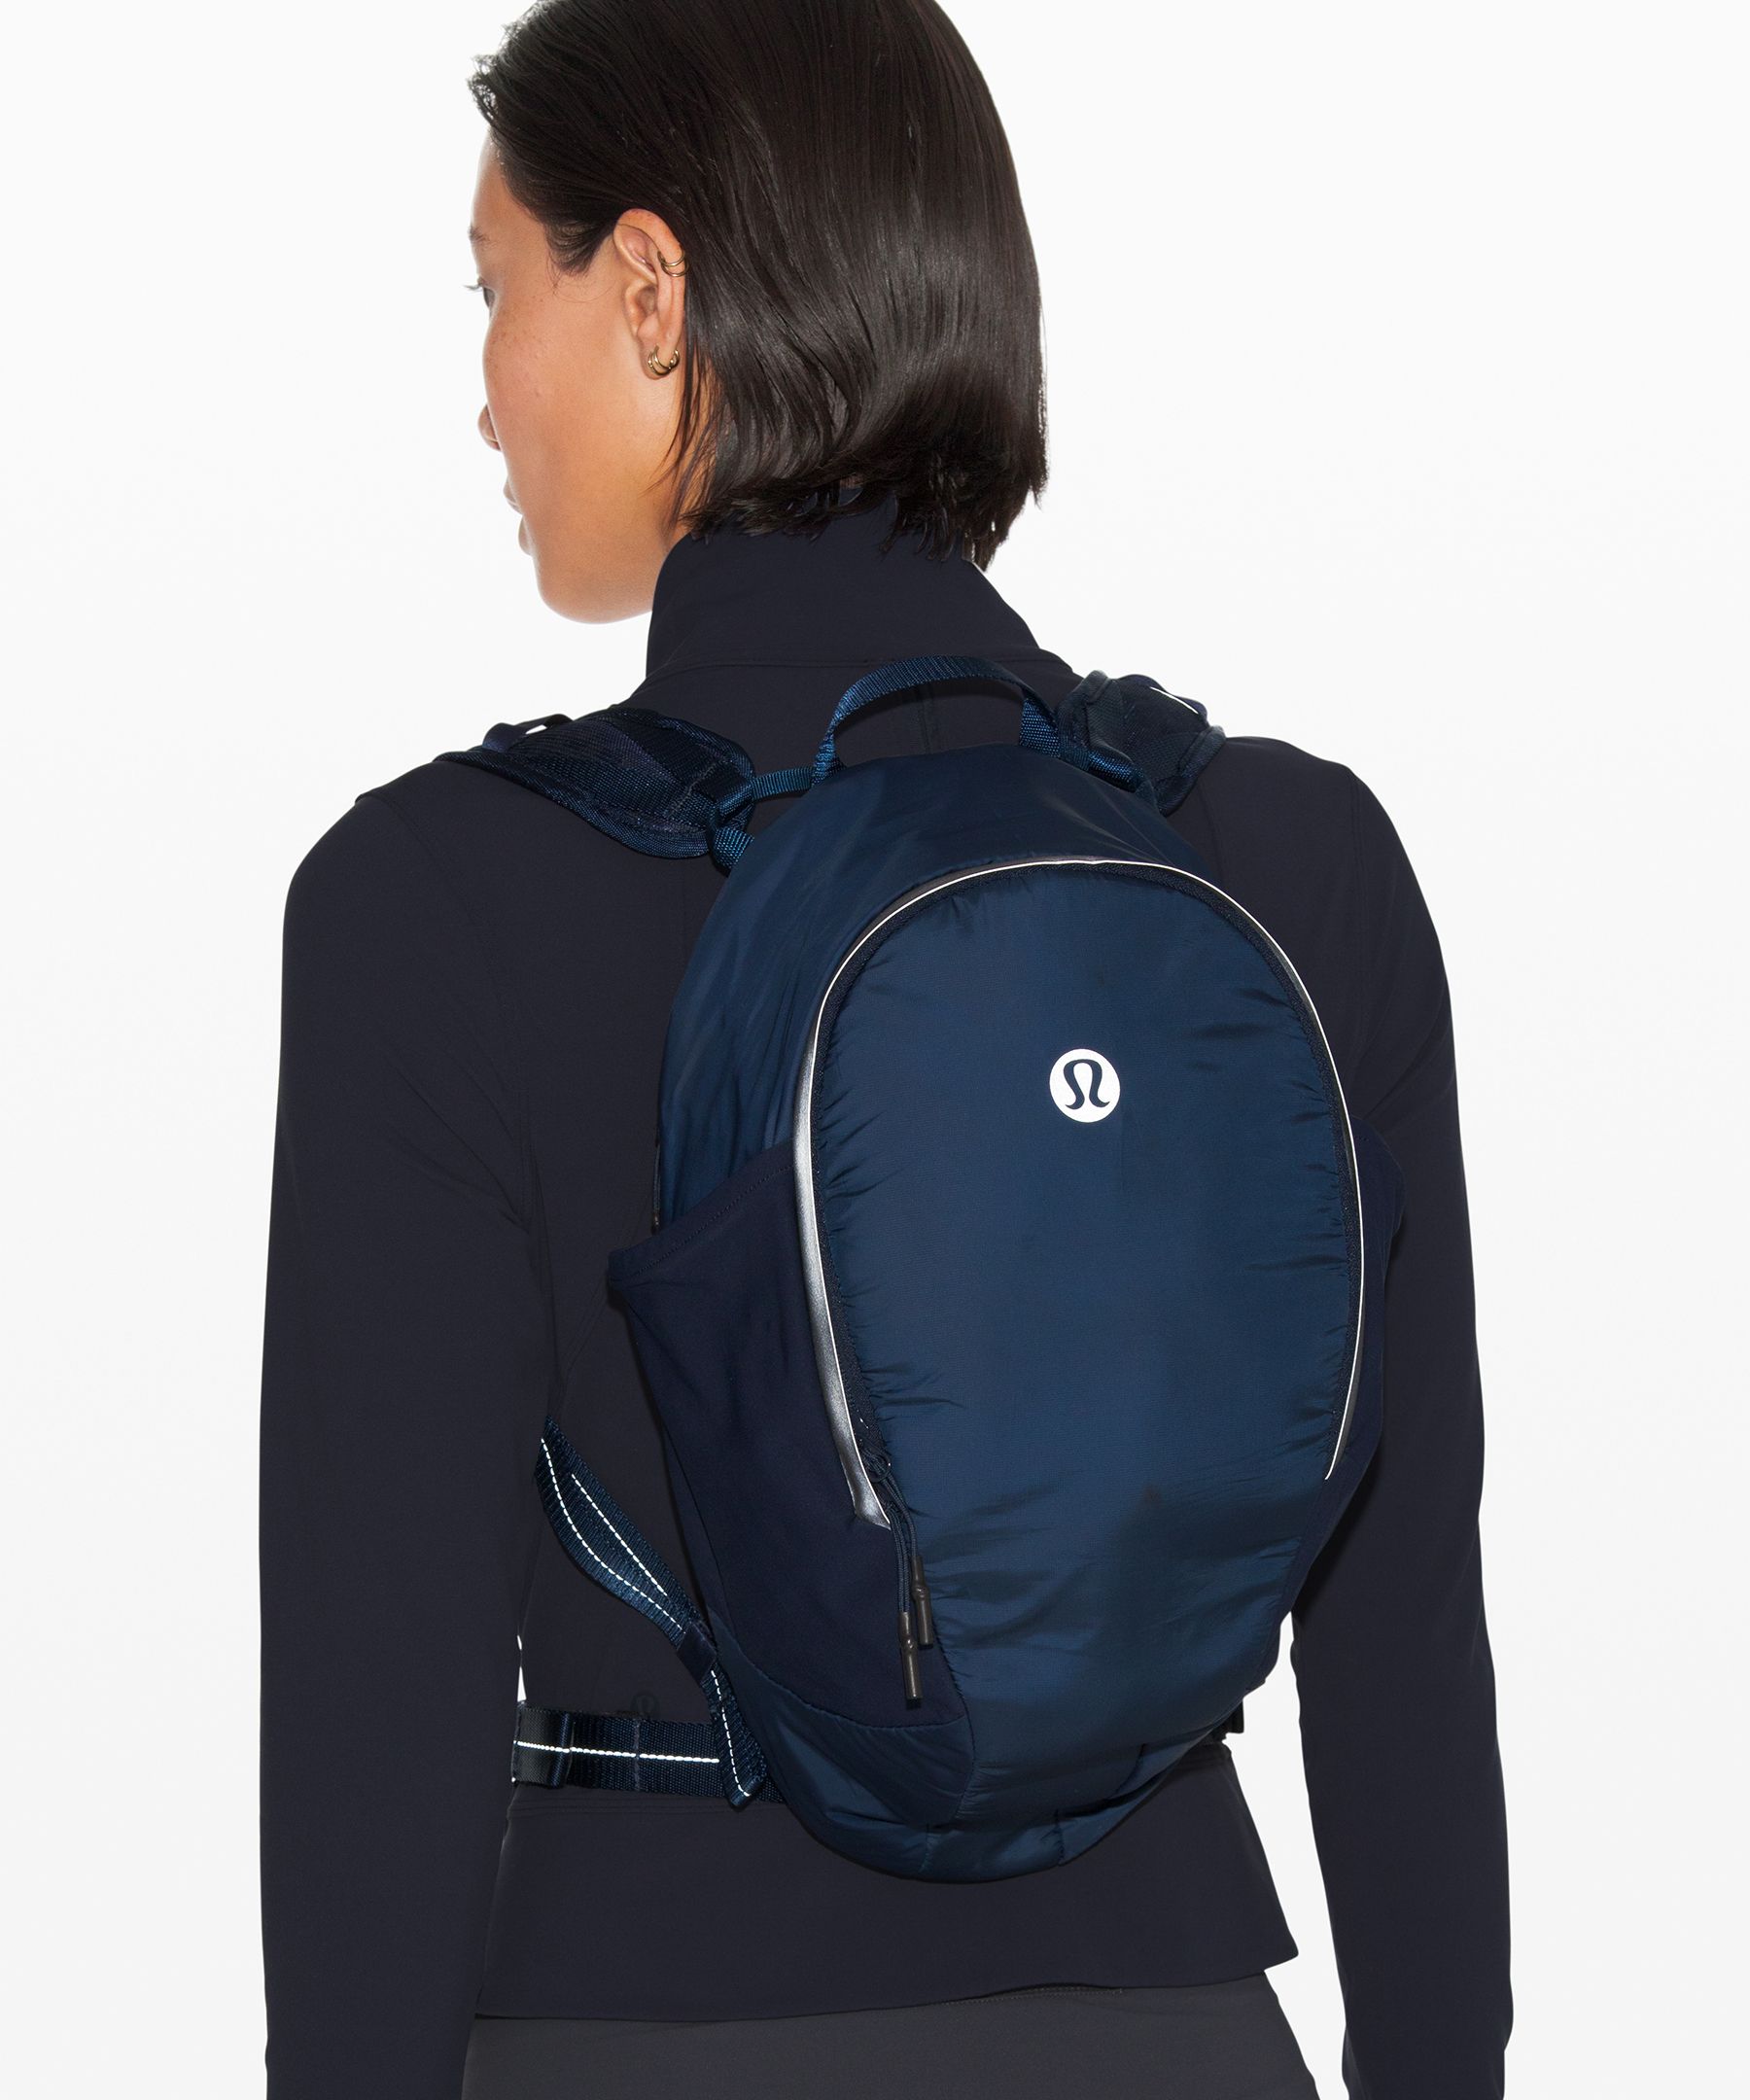 lululemon fast and free backpack